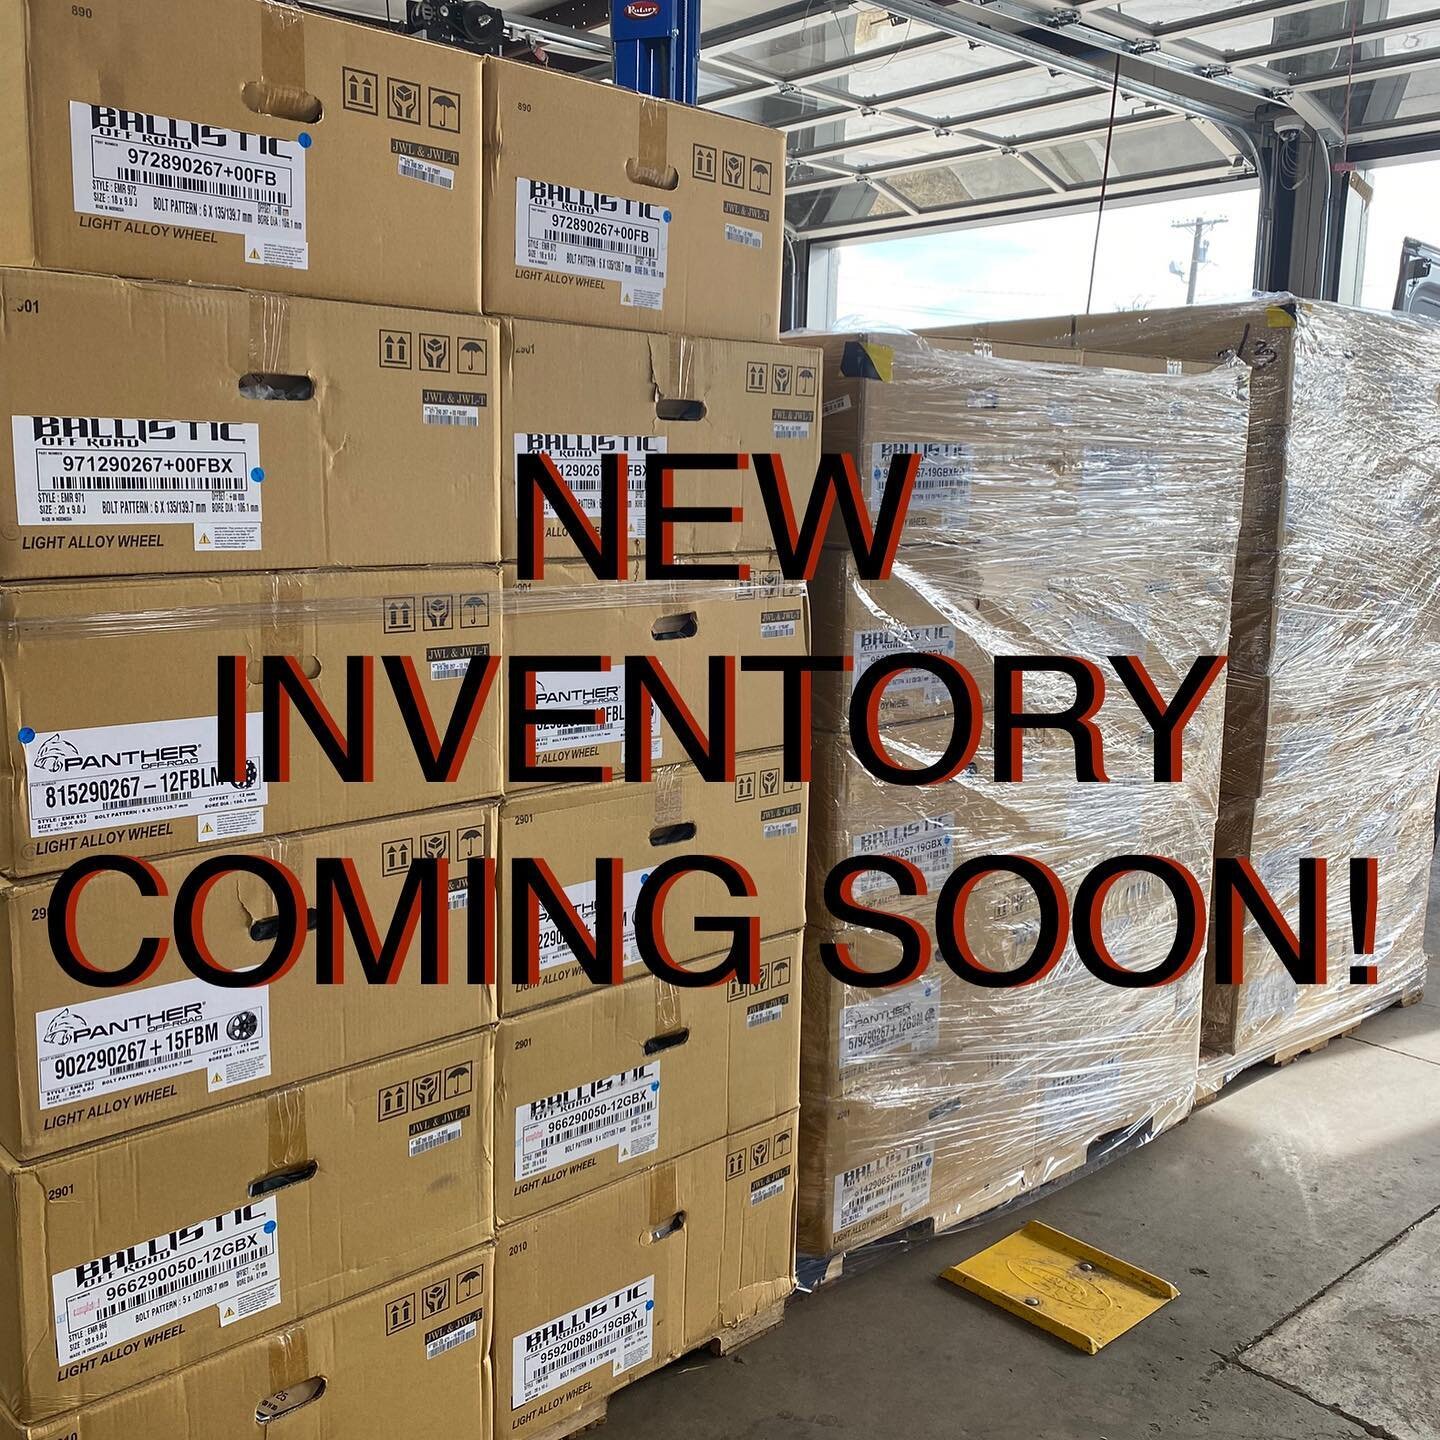 we just got a big shipment of new wheels that will be available soon! Our December sale is still going on just $5 down and no credit checks!
.
.
.
.
.
.
.
.
.
.
.
#wheels #rims #rimsforsale #ballistic #ballisticwheels #offroad #offroadrims #offroadwh